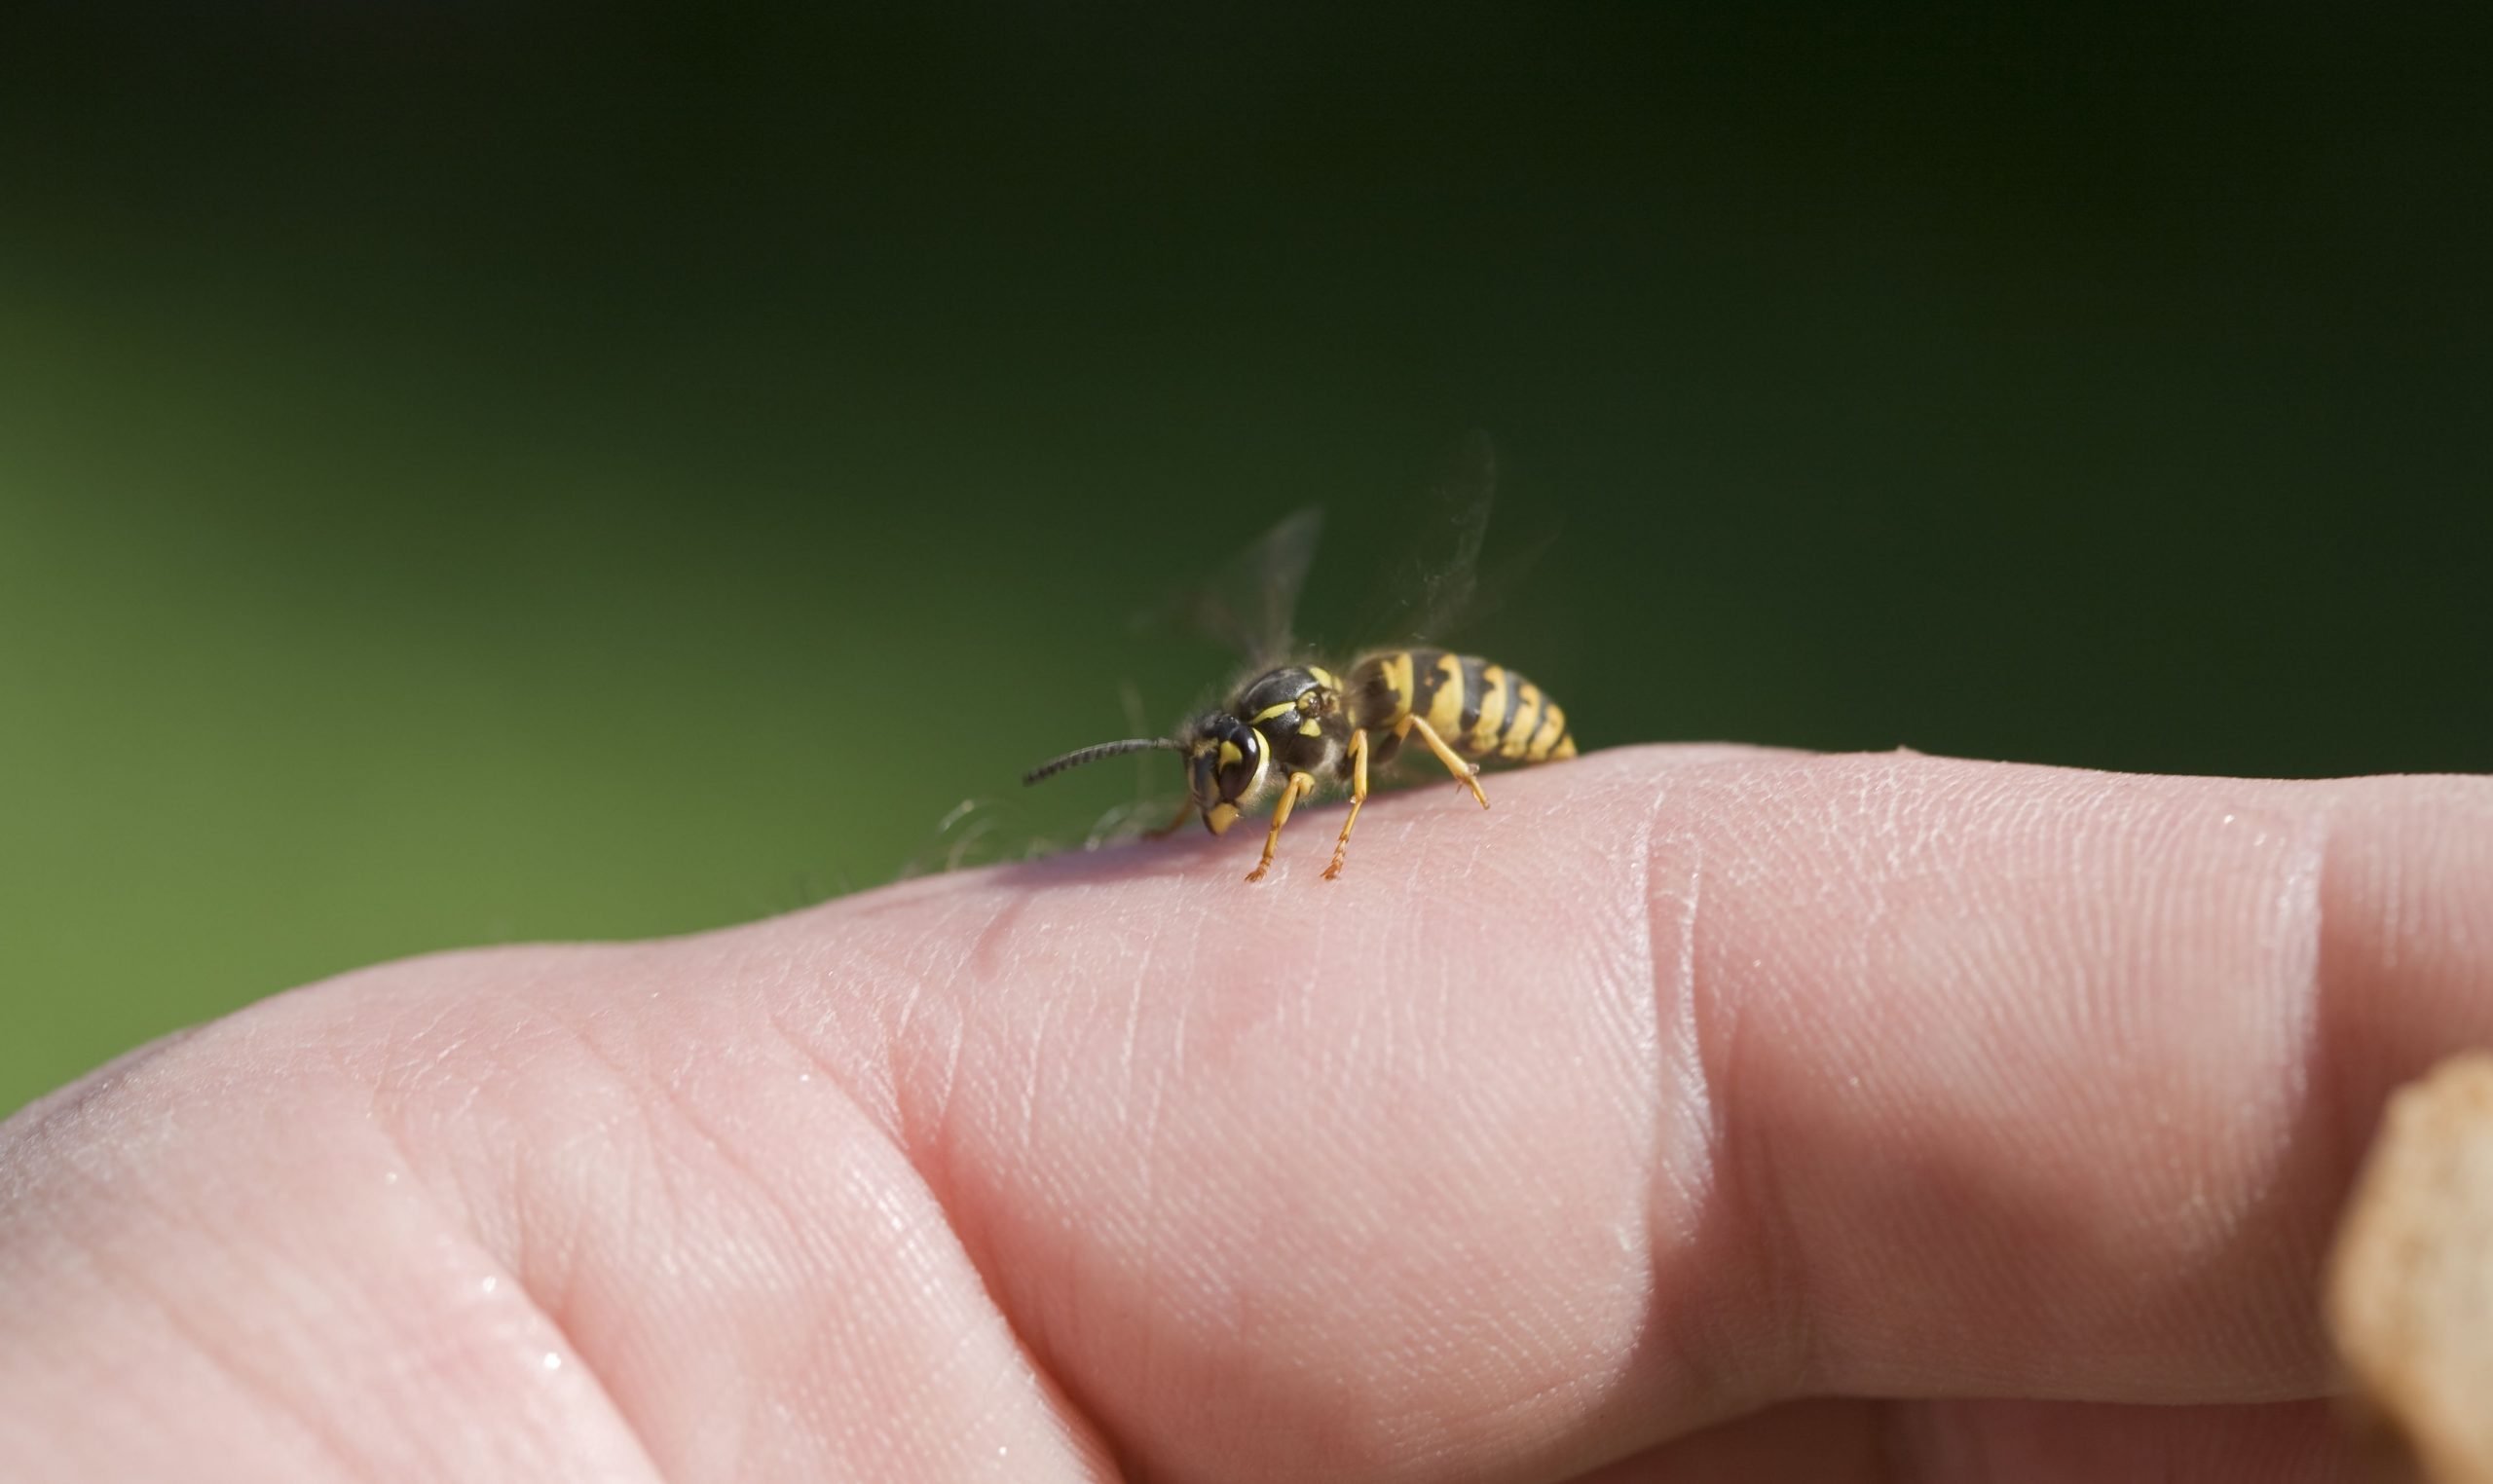 How to Treat a Bee Sting Safely